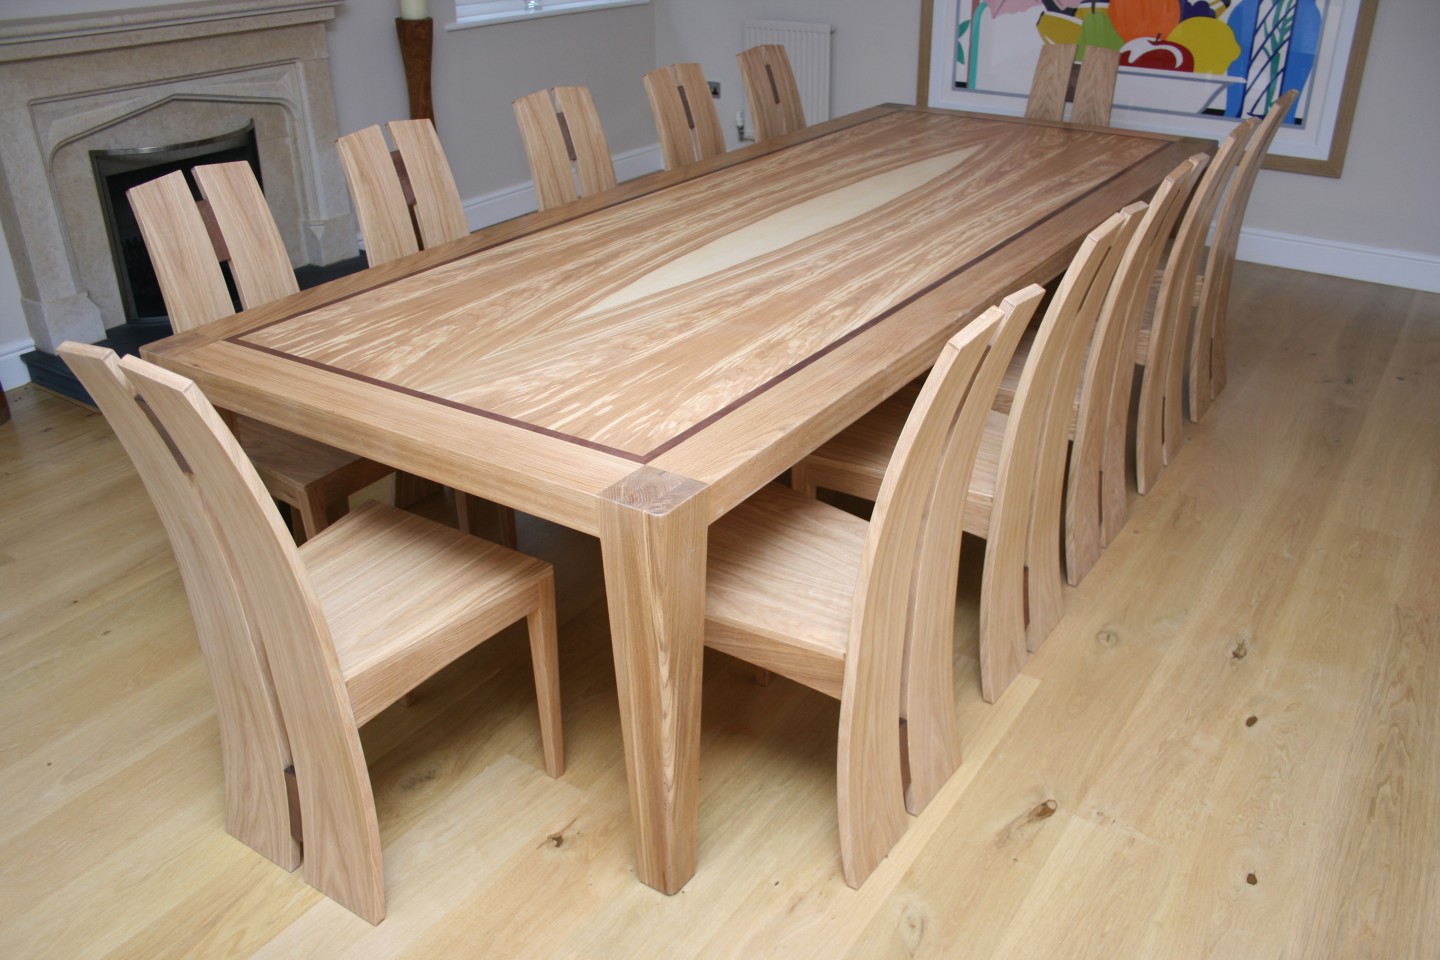 Bespoke 12 seater dining table